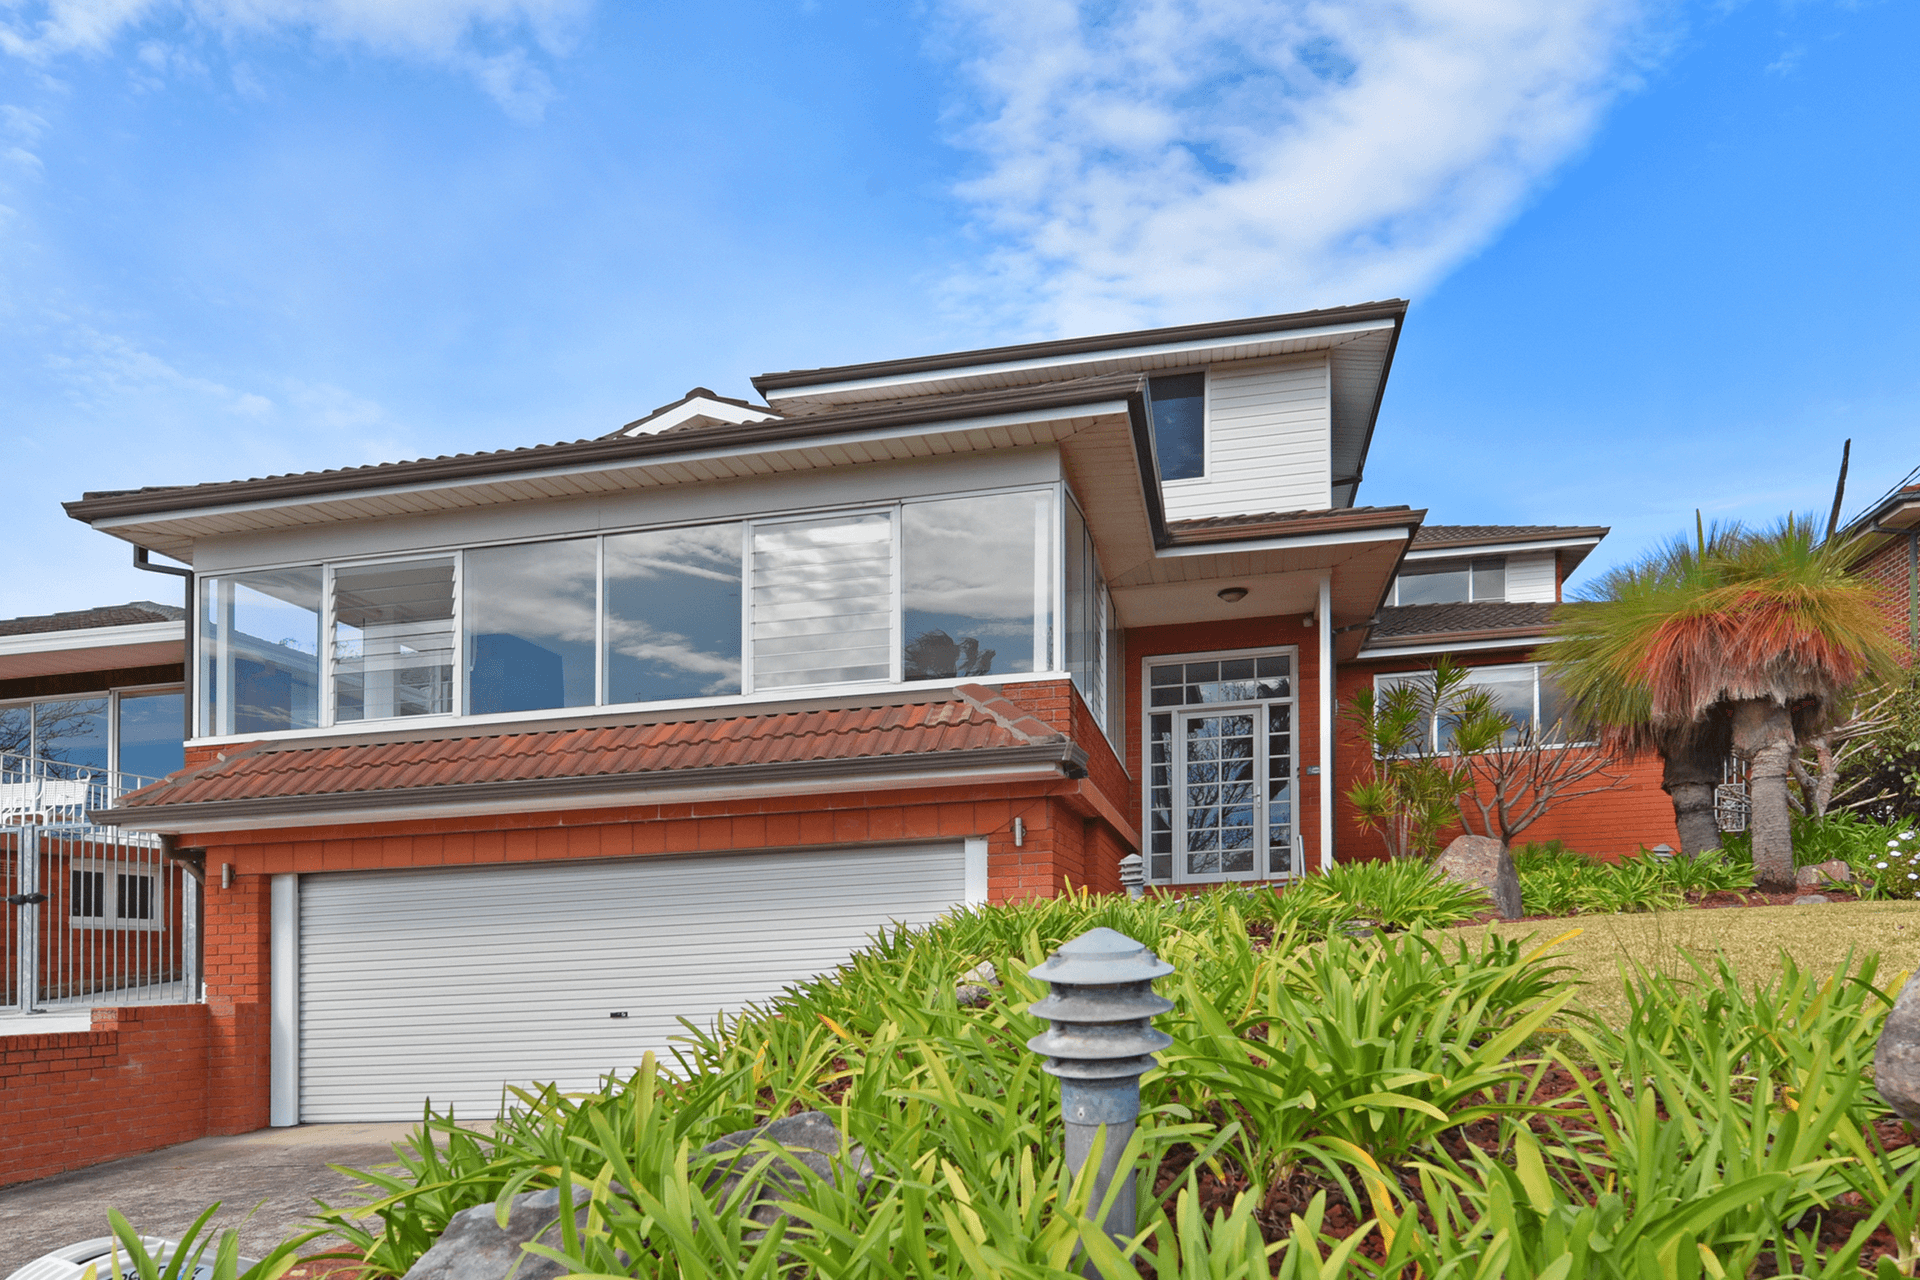 63 Dareen Street, Frenchs Forest, NSW 2086